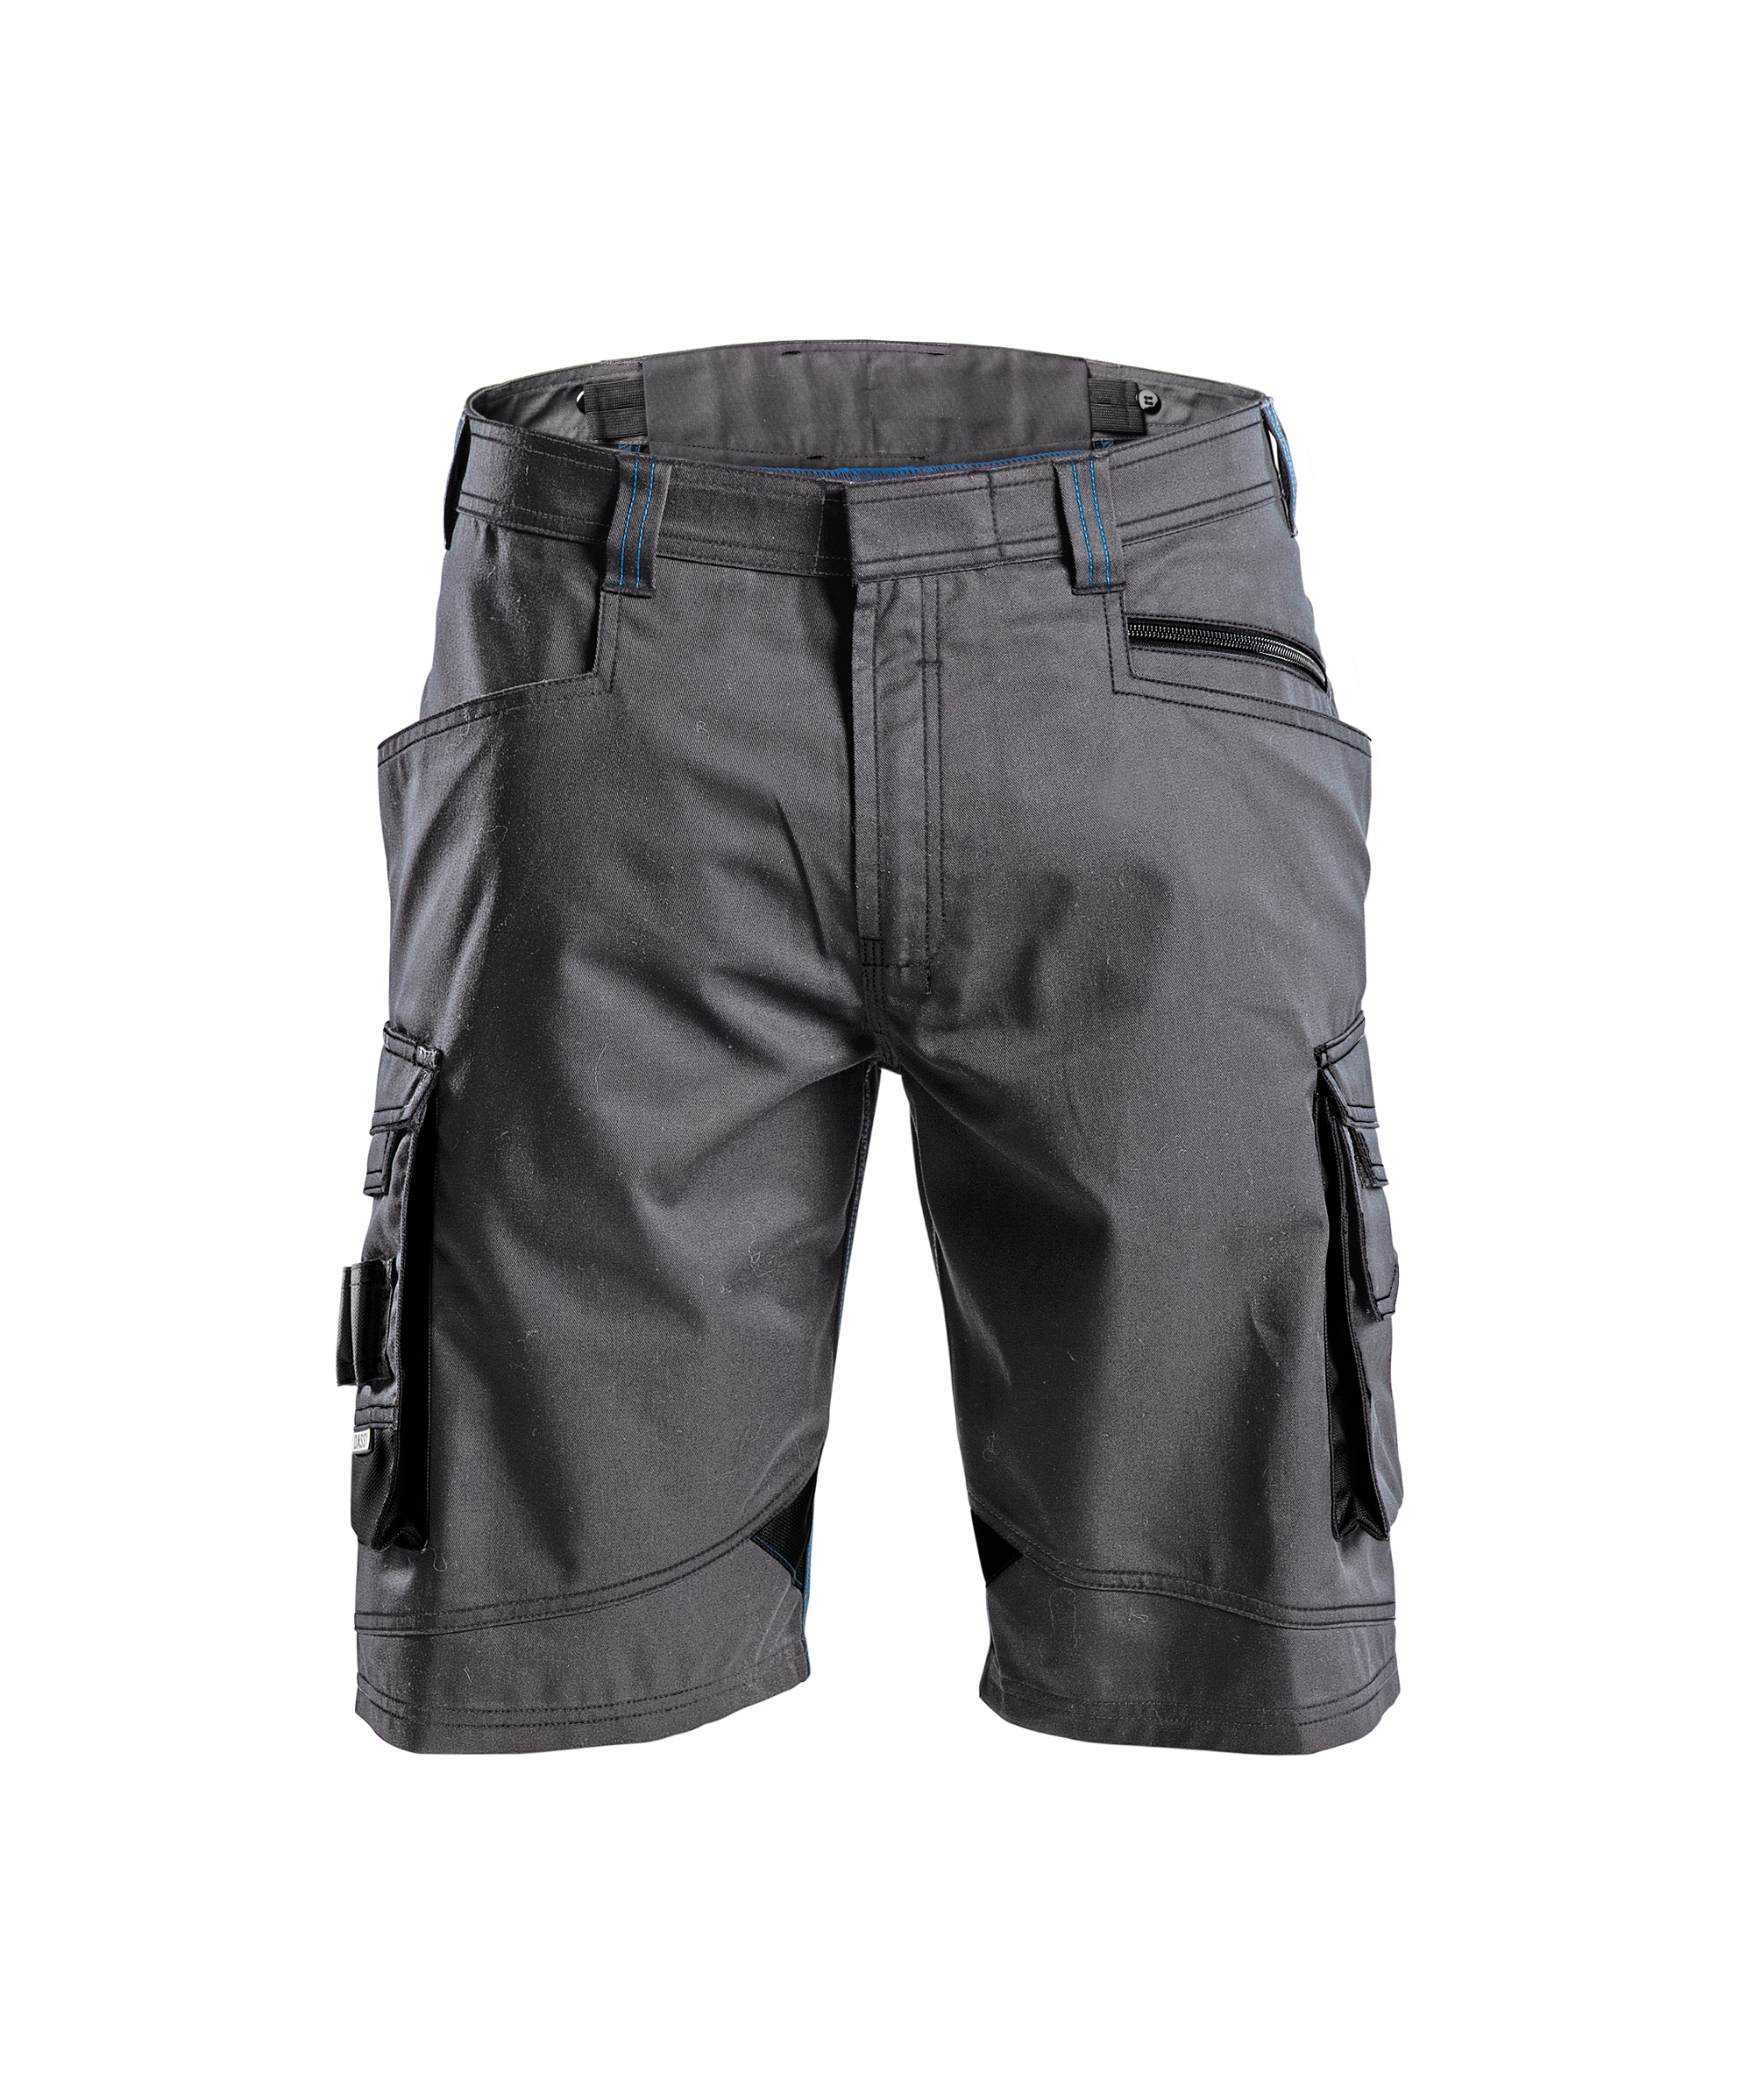 cosmic_two-tone-work-shorts_anthracite-grey-black_front.jpg